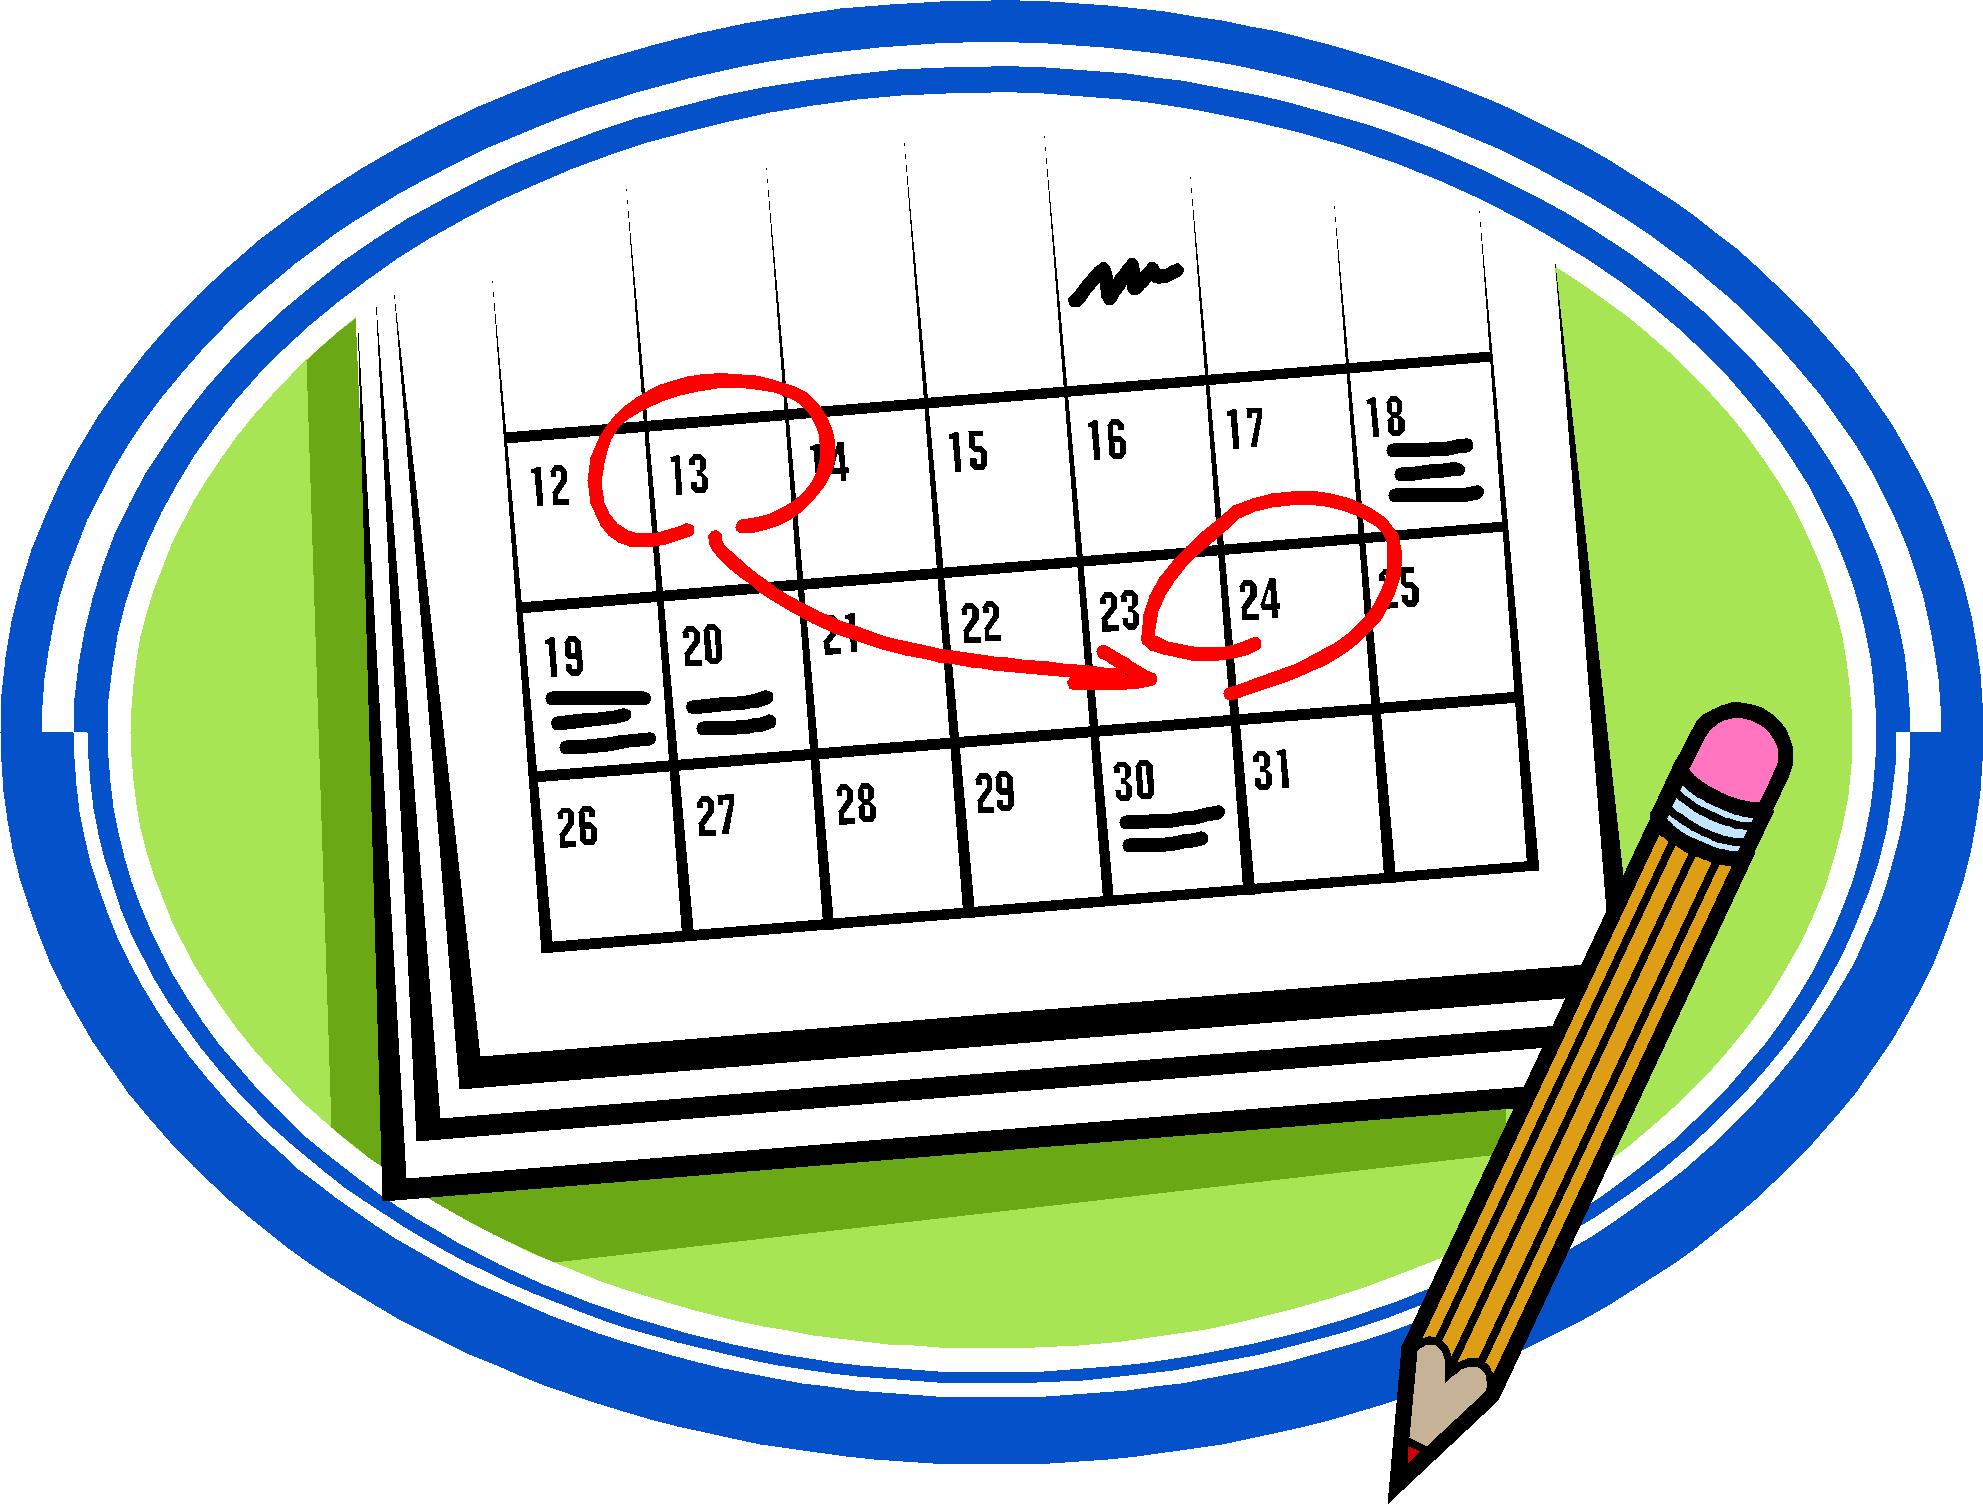 Virginia fiduciary law blog. Organized clipart scheduling